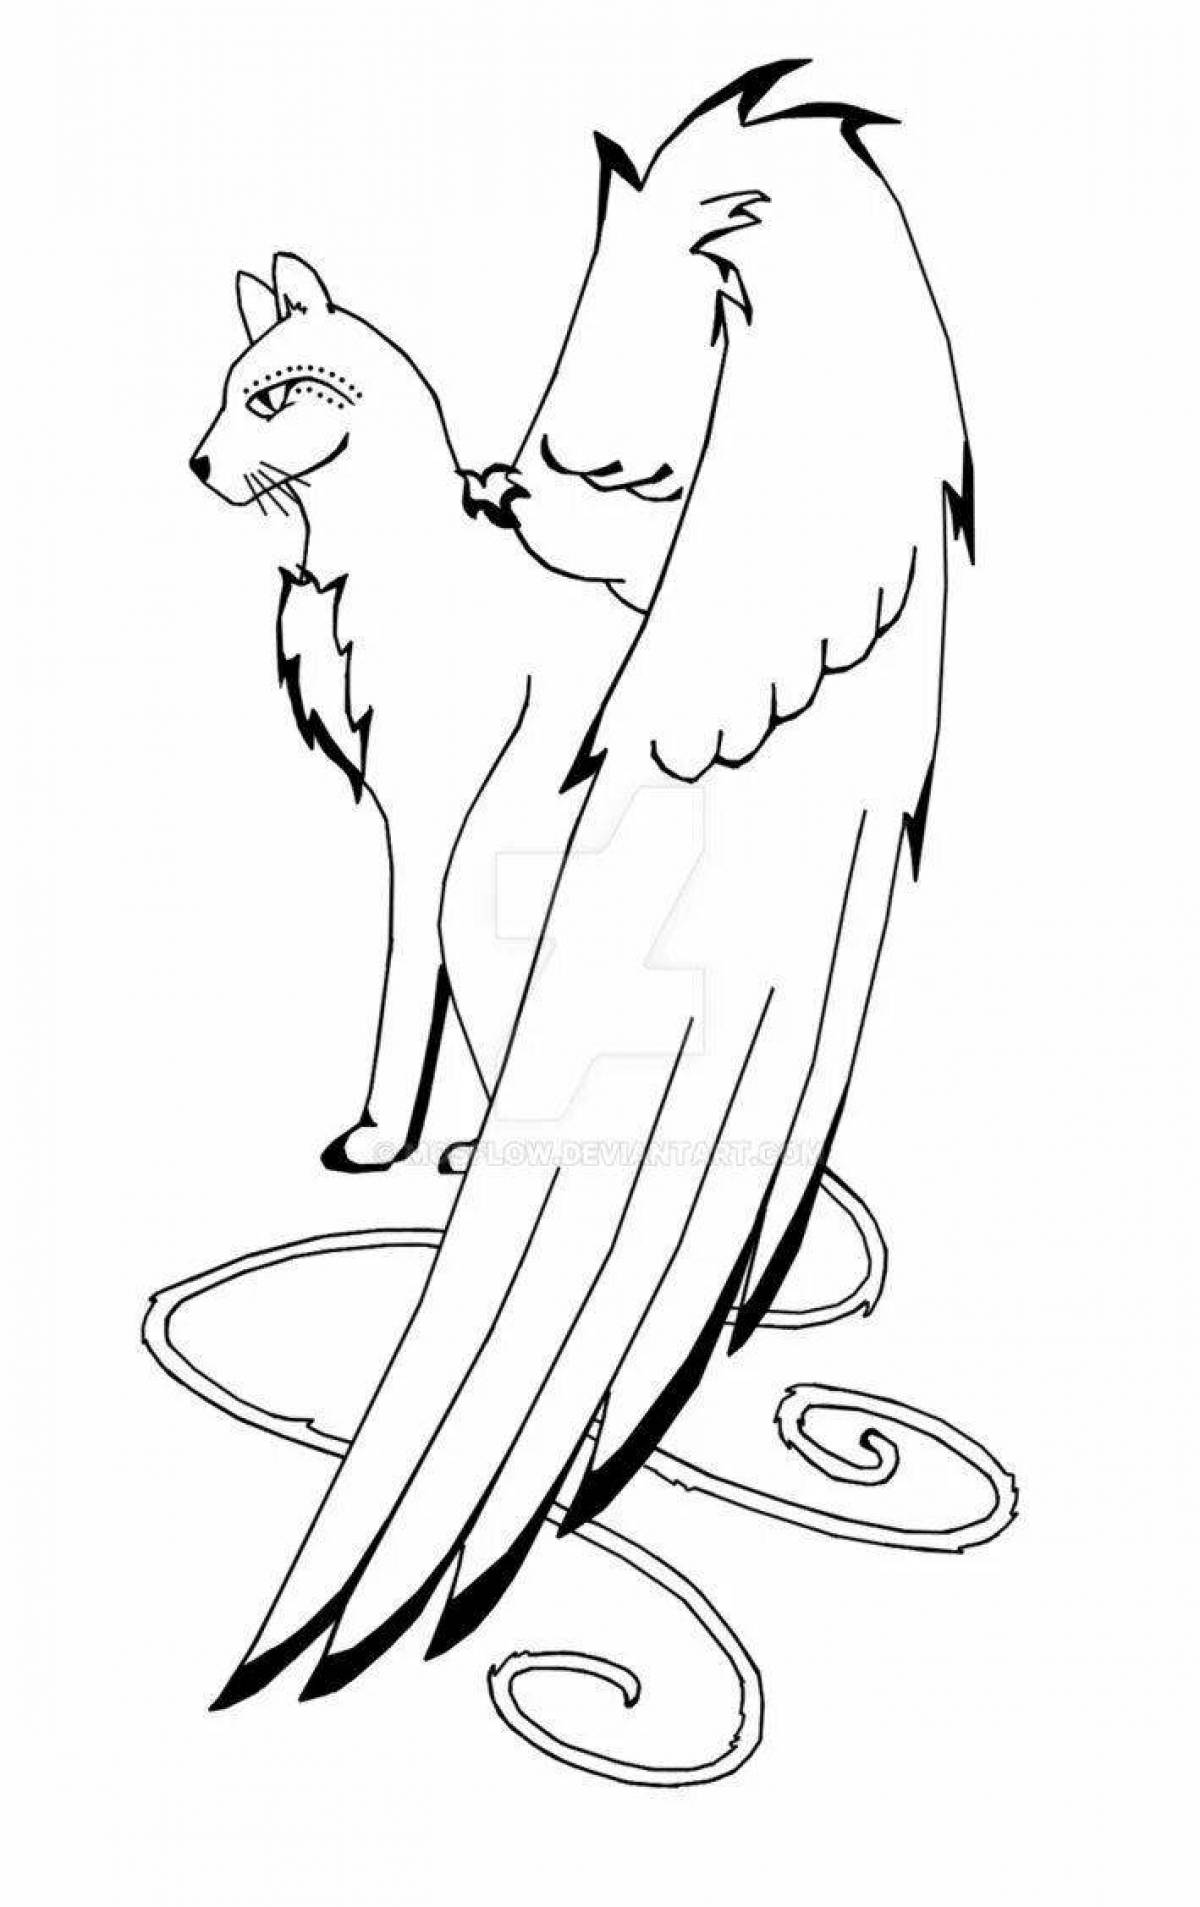 Coloring page mesmerizing flying cat